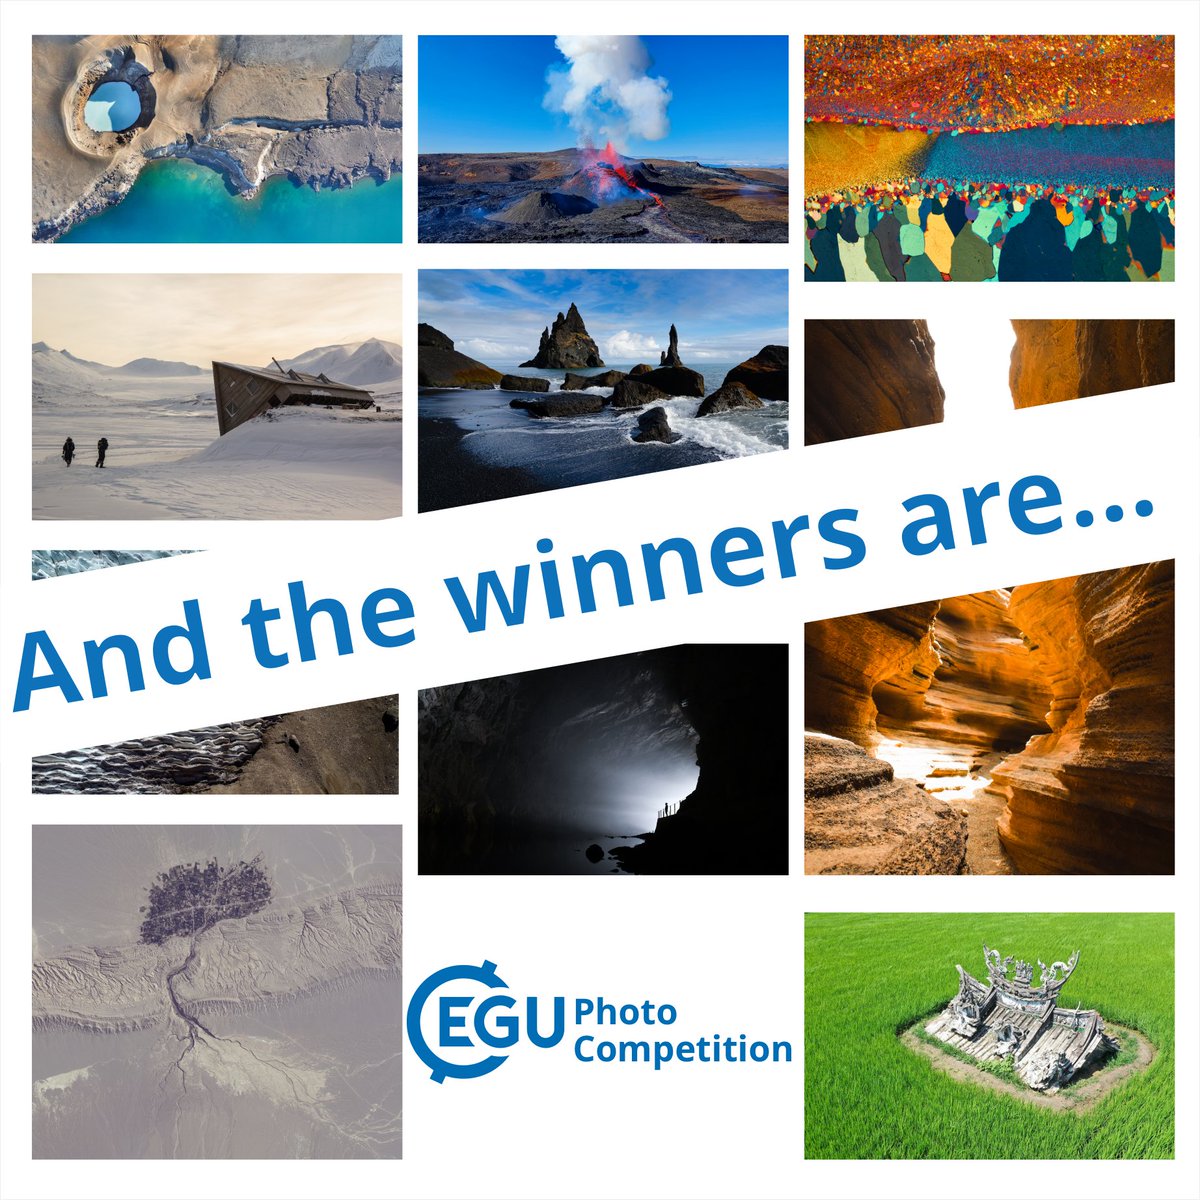 EGU is delighted to announce the three winners of the #EGU24 Photo Competition! Winners get free registration to #EGU25 and the admiration of the EGU community!

Head over to the #EGUblogs to find out who won!
egu.eu/7OJ79N/